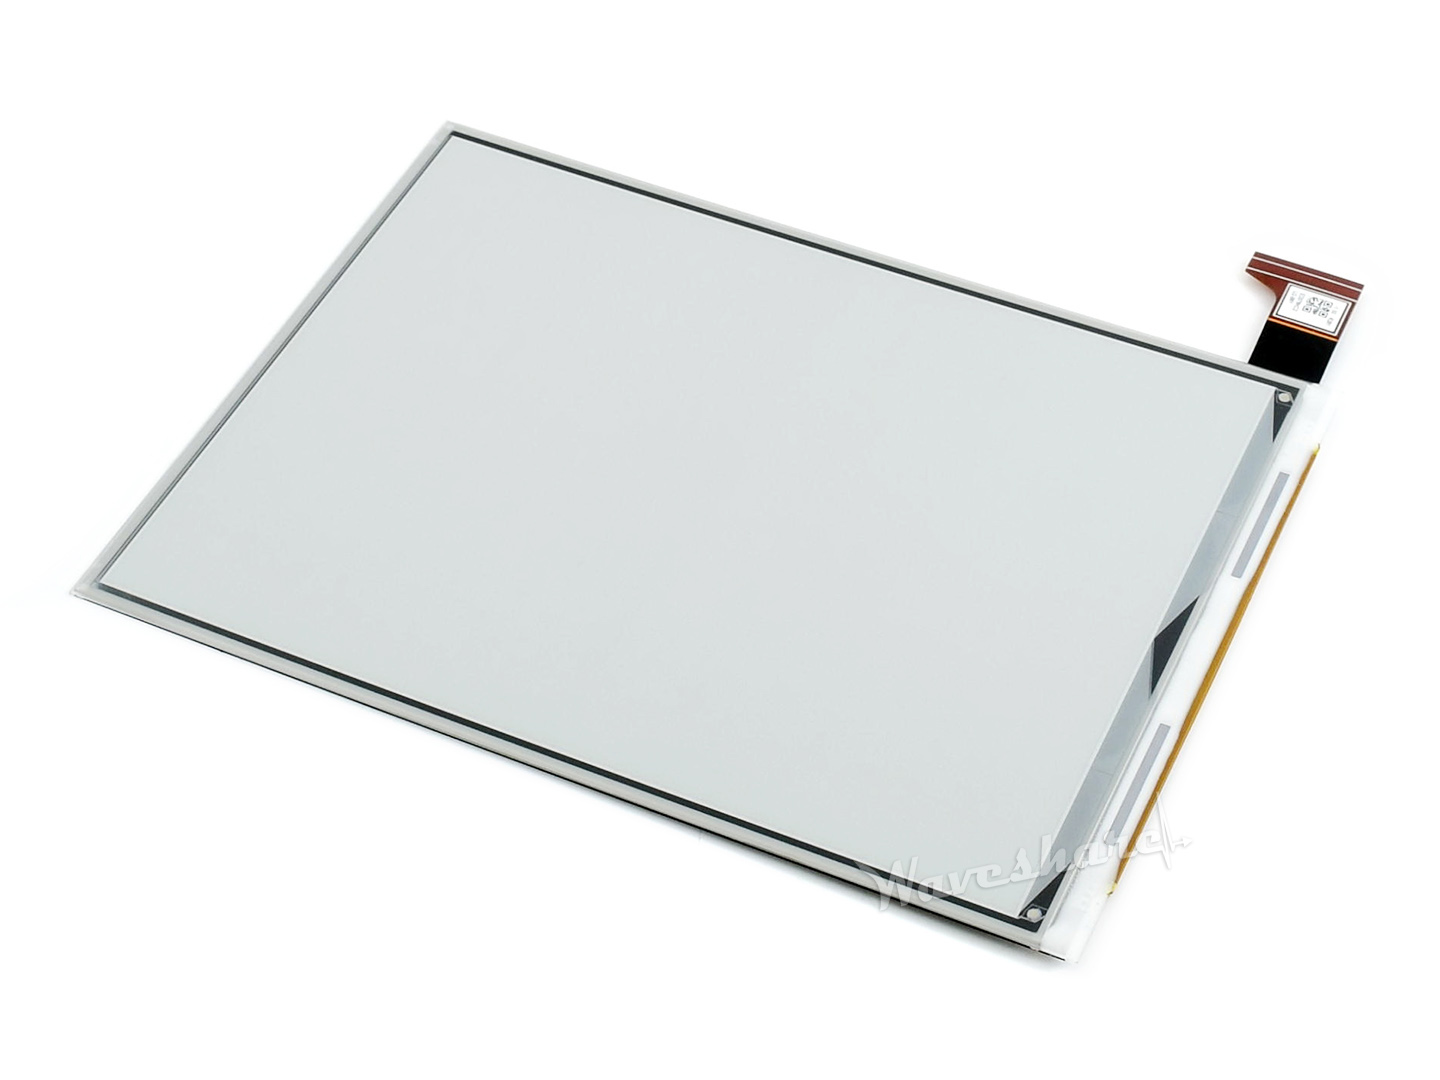 1872*1404, 7.8inch E-Ink raw display